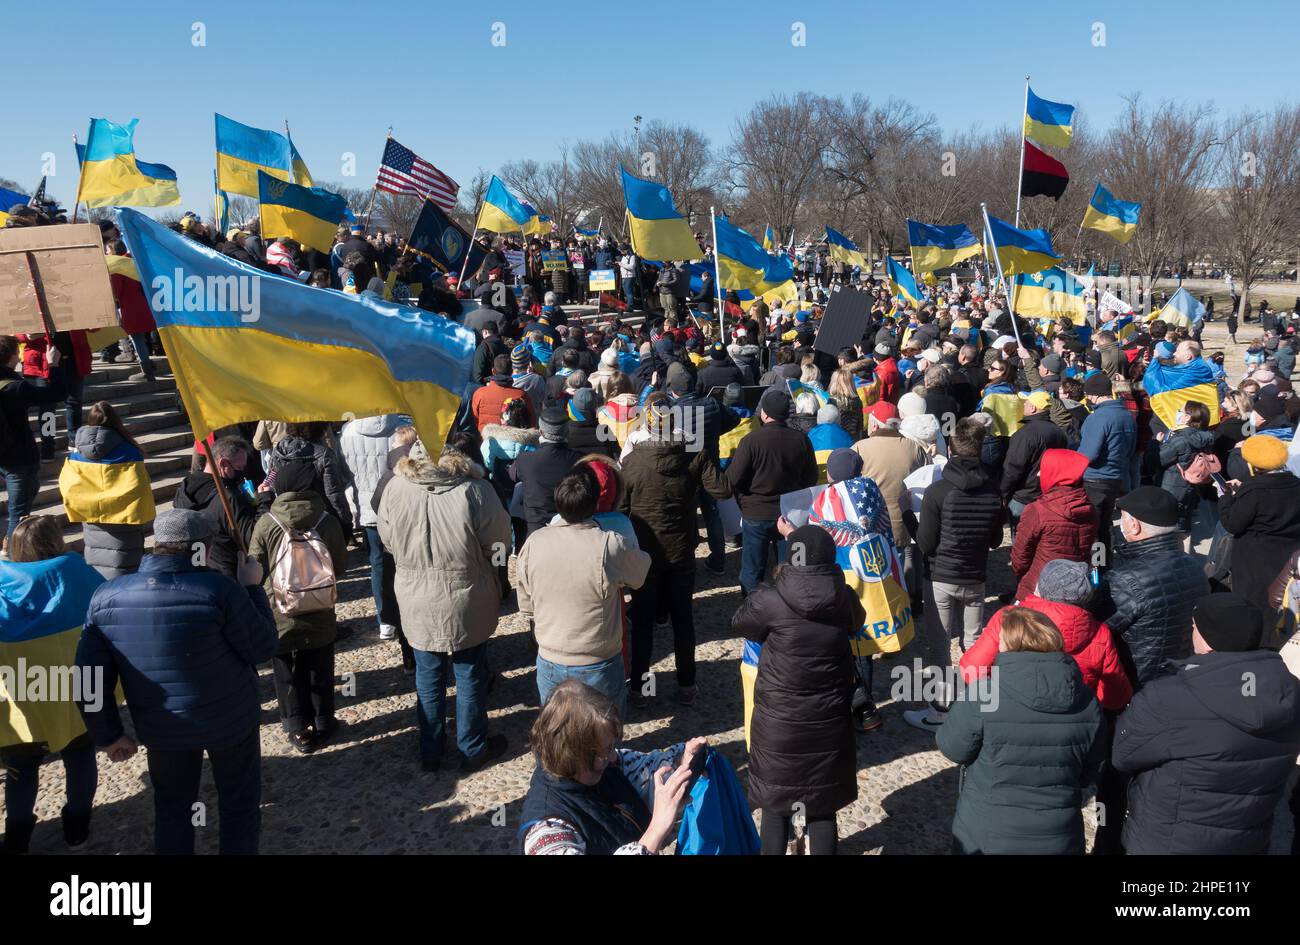 Feb. 20, 2020. Demonstrators at the Stand with Ukraine rally at the Lincoln Memorial in Washington, DC, honoring those killed during the Revolution of dignity in 2013 and 2014, and demanding an end to Russia’s aggression in Ukraine and occupation of Crimea, and also calling for President Biden to take stronger action to deter a Russian invasion of Ukraine. A march to the White House followed the rally. Stock Photo